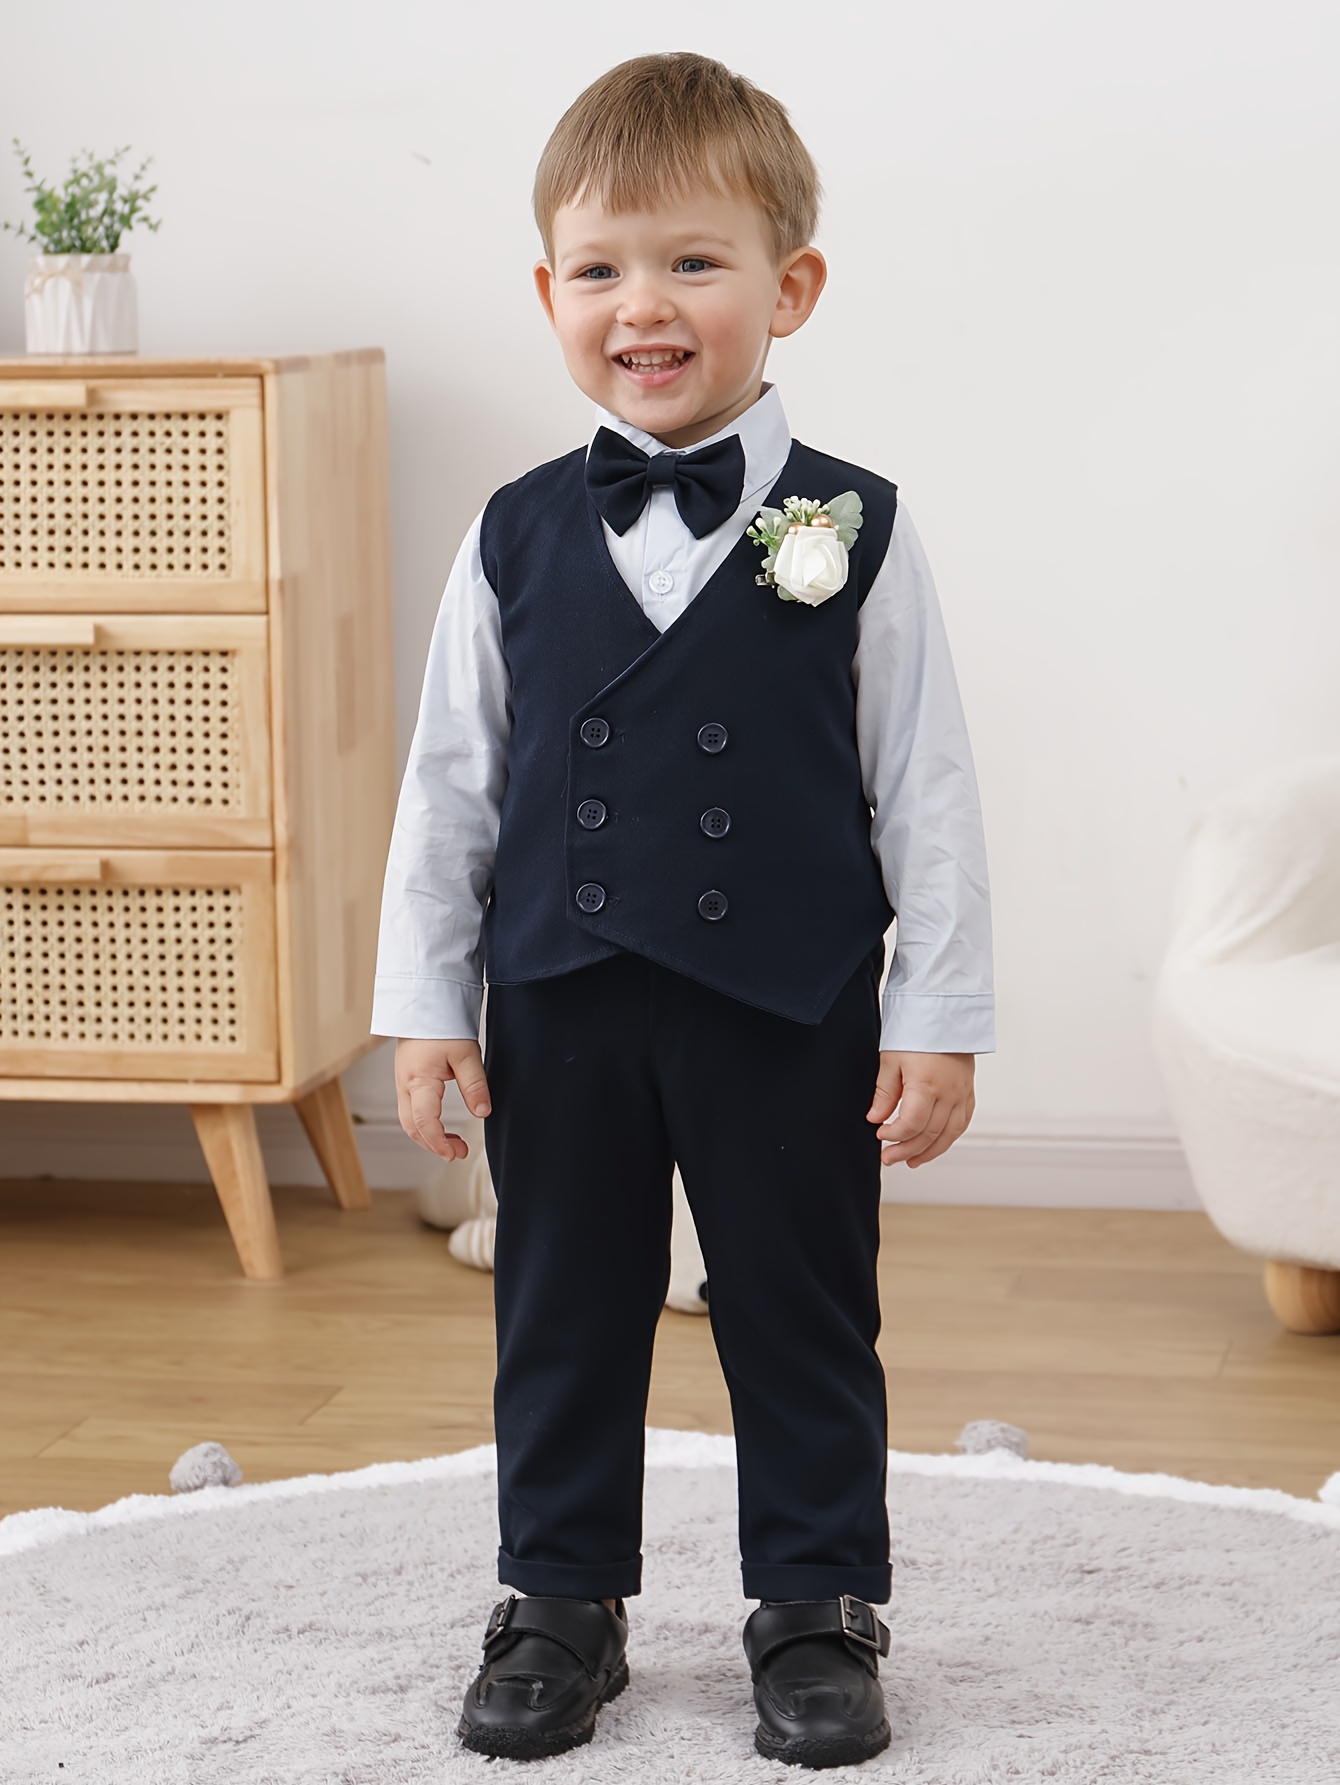  Boy Suspenders Outfit Pantalon Con Tirantes Para Bebe Dress  Clothes Wedding Boys Toddler Gentleman Long Bow Tie Size 2t: Clothing,  Shoes & Jewelry